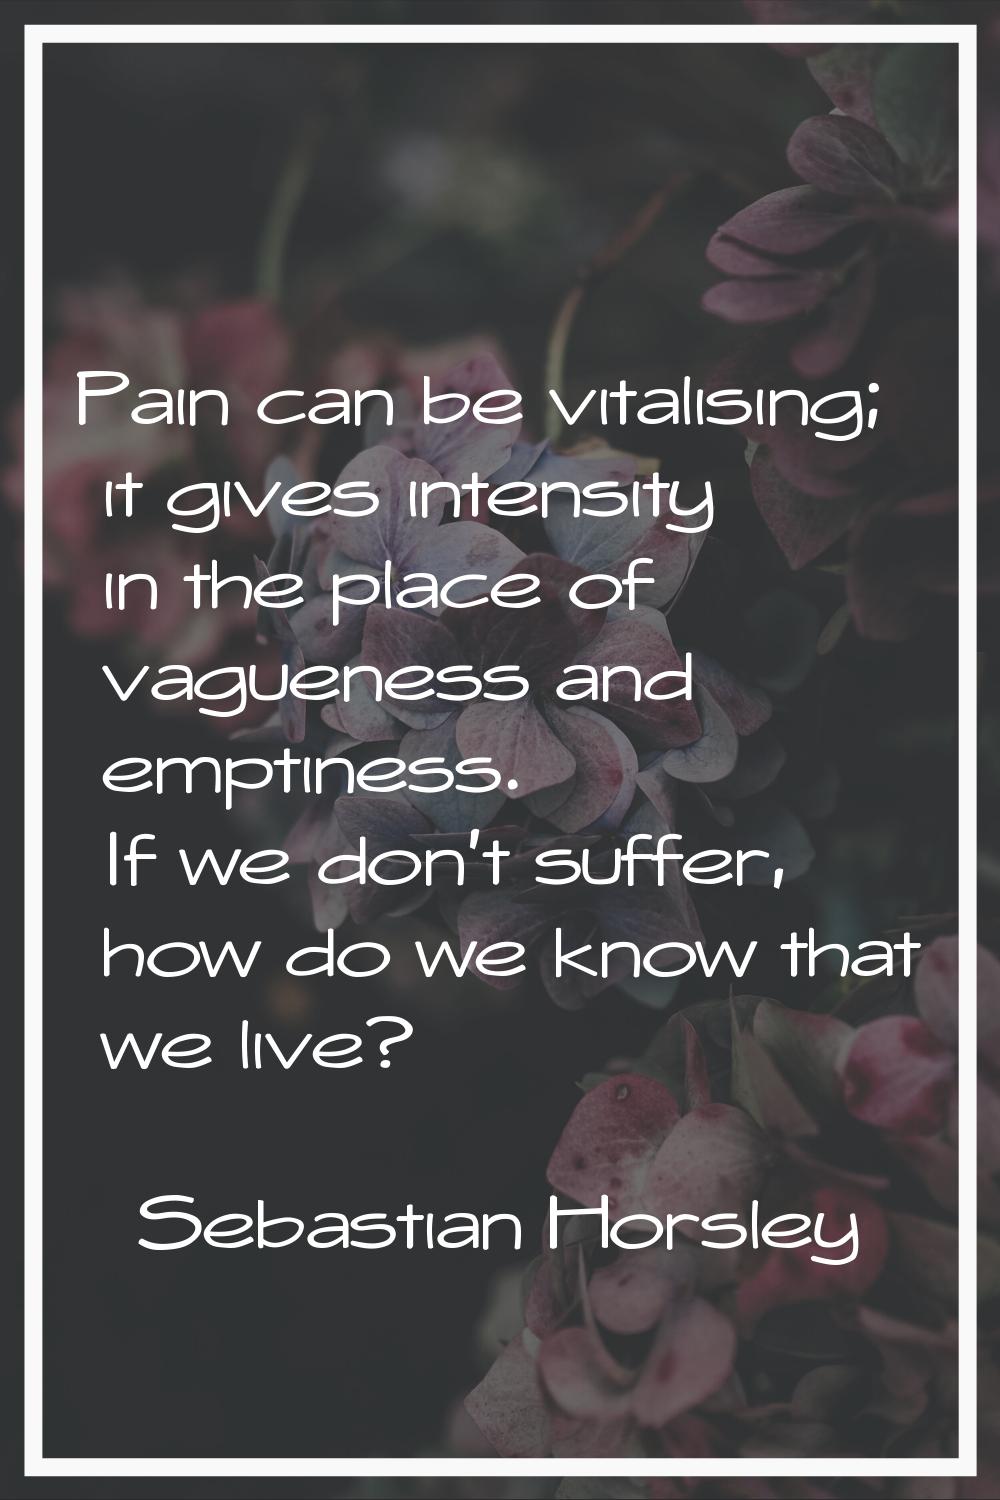 Pain can be vitalising; it gives intensity in the place of vagueness and emptiness. If we don't suf